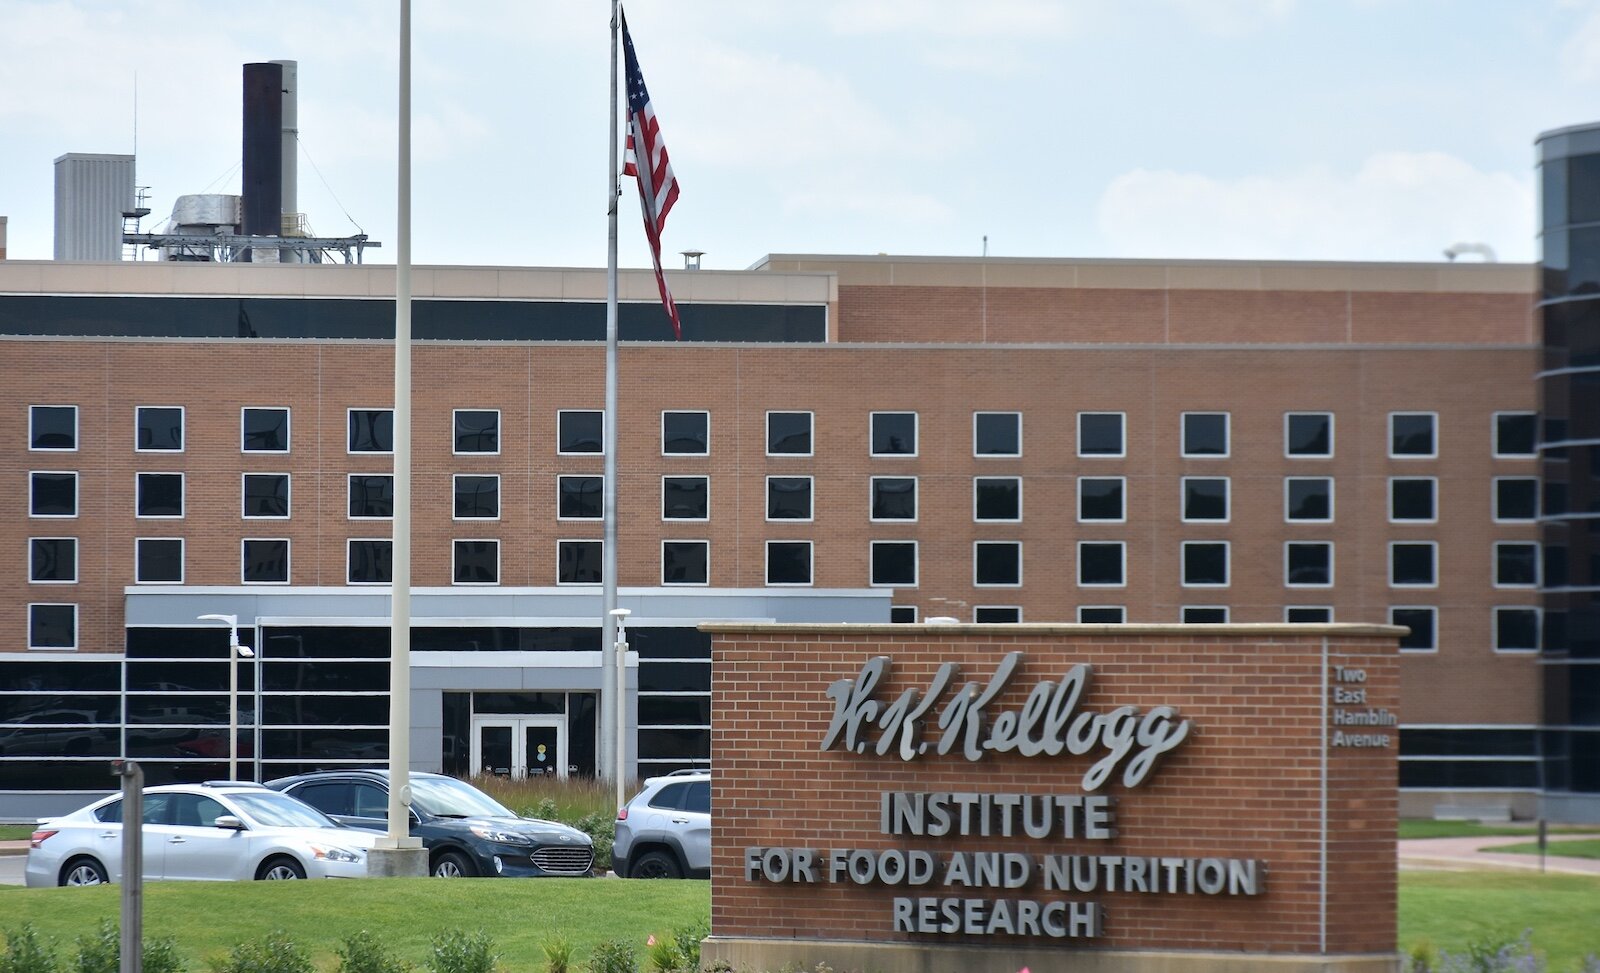 Kellogg Company’s research division, the W.K. Kellogg Institute, is located in downtown Battle Creek.